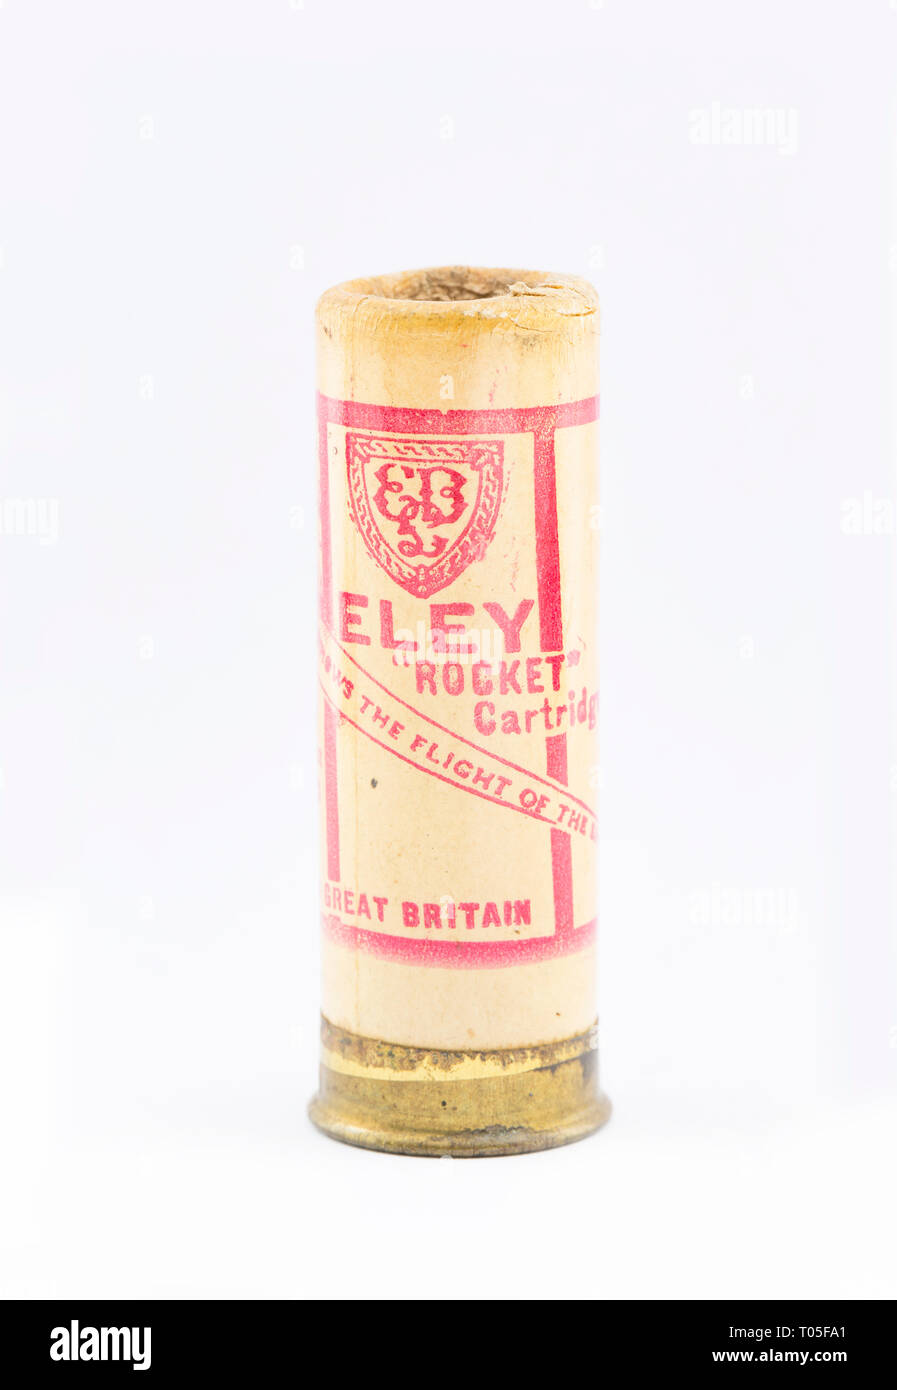 An Eley Rocket cartridge containing No 6 lead shot pellets. The cartridge contained a tracer element that would ignite when the cartridge was fired. T Stock Photo